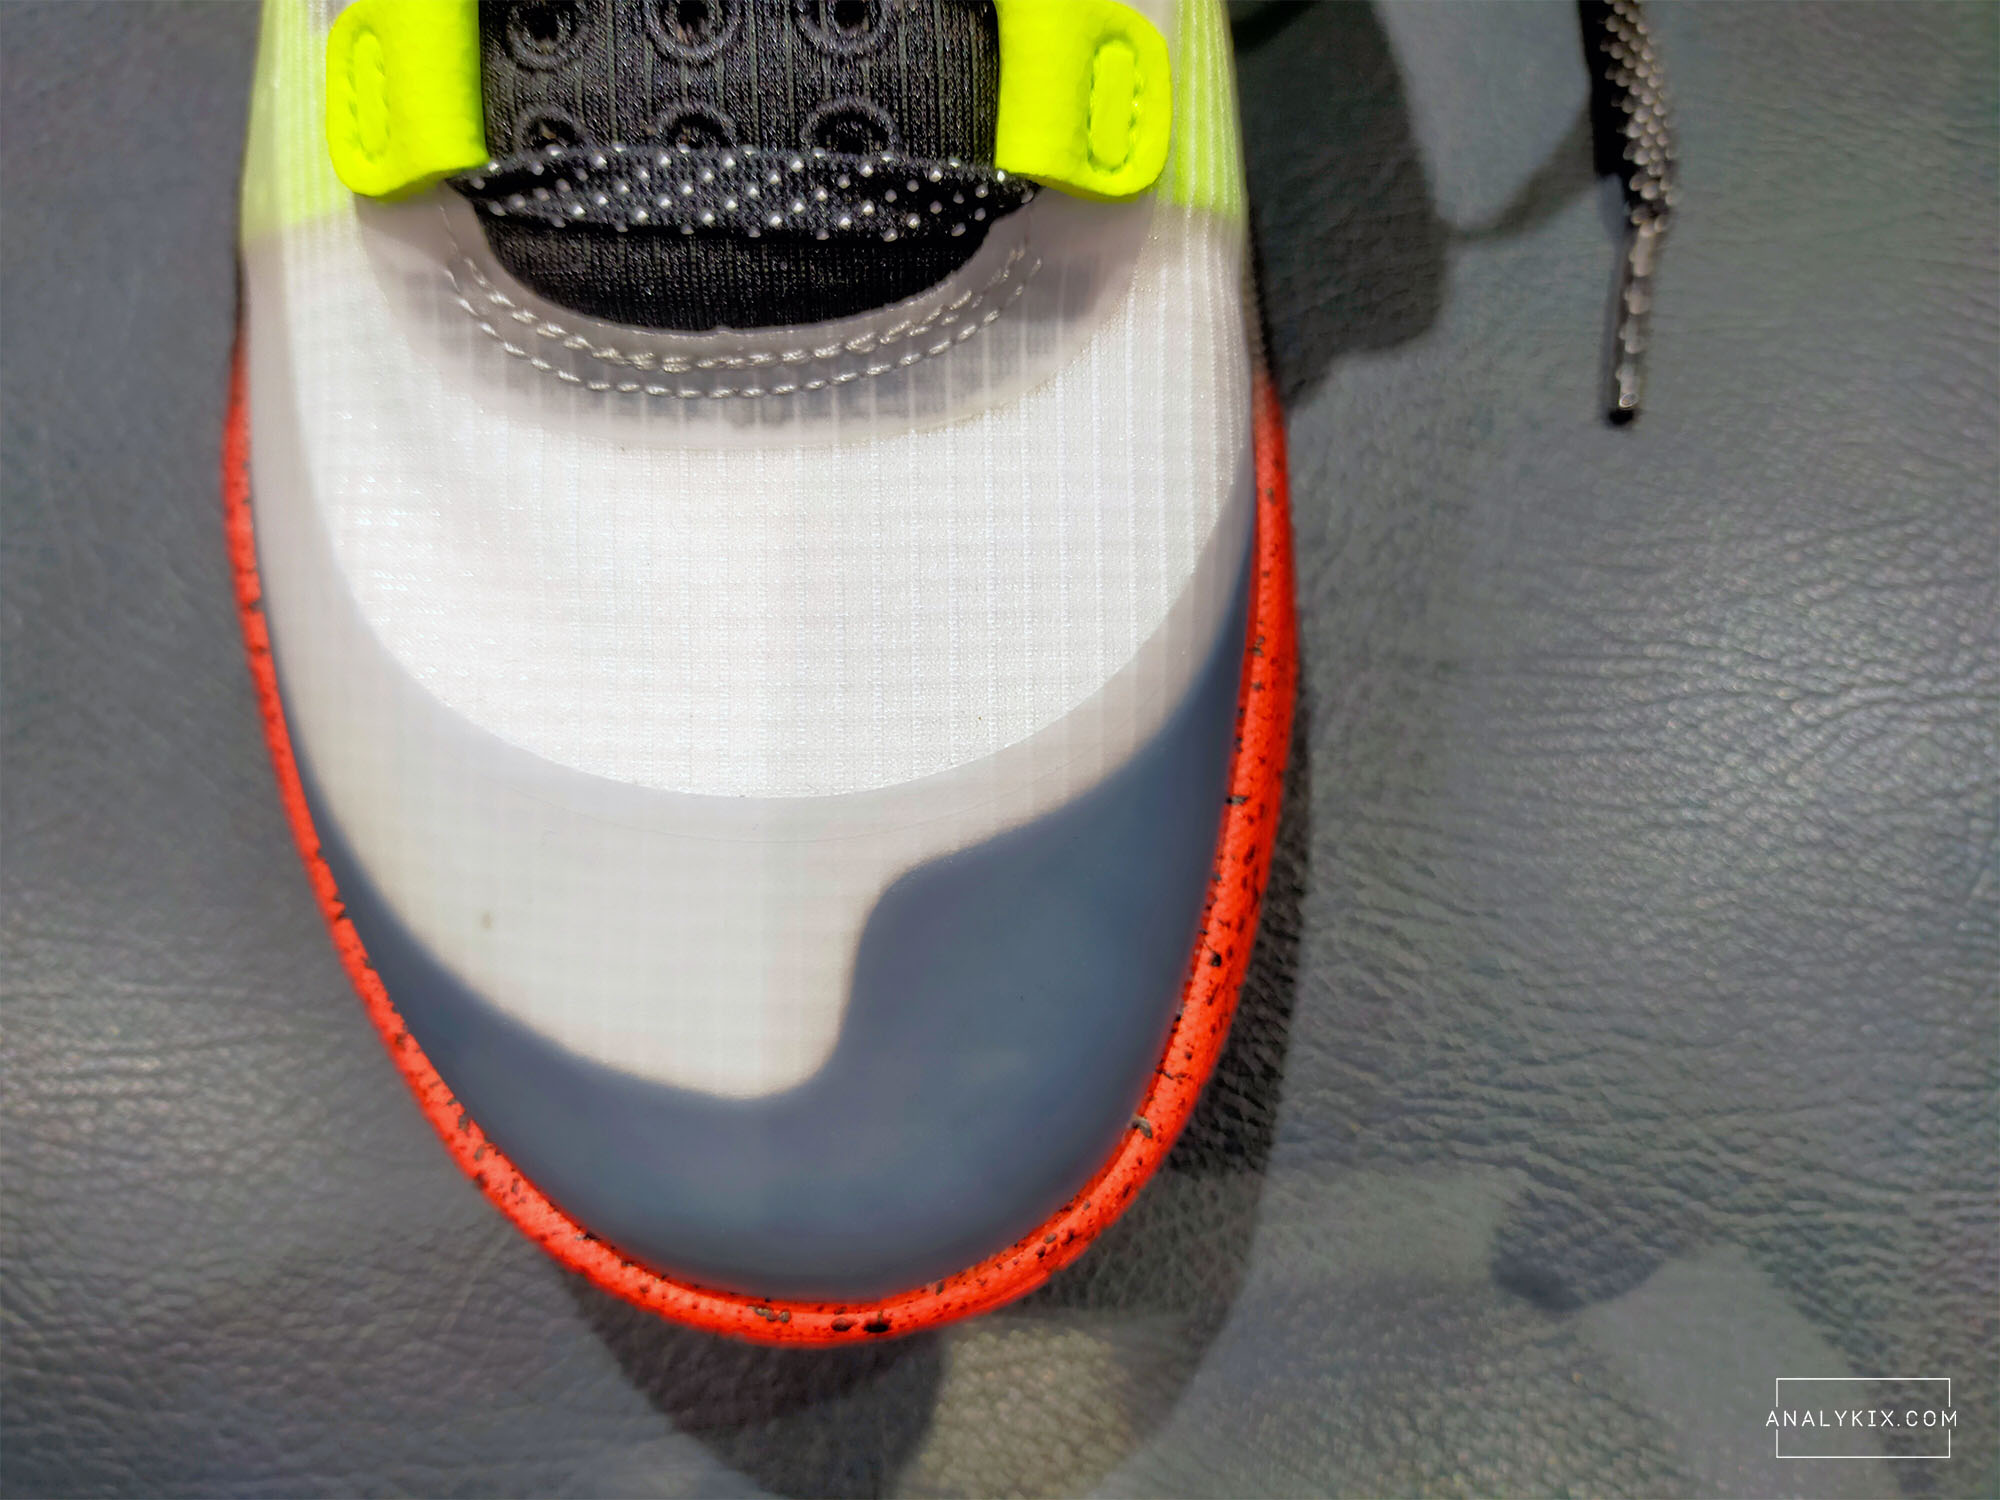 fuse overlays in the toe area for durability